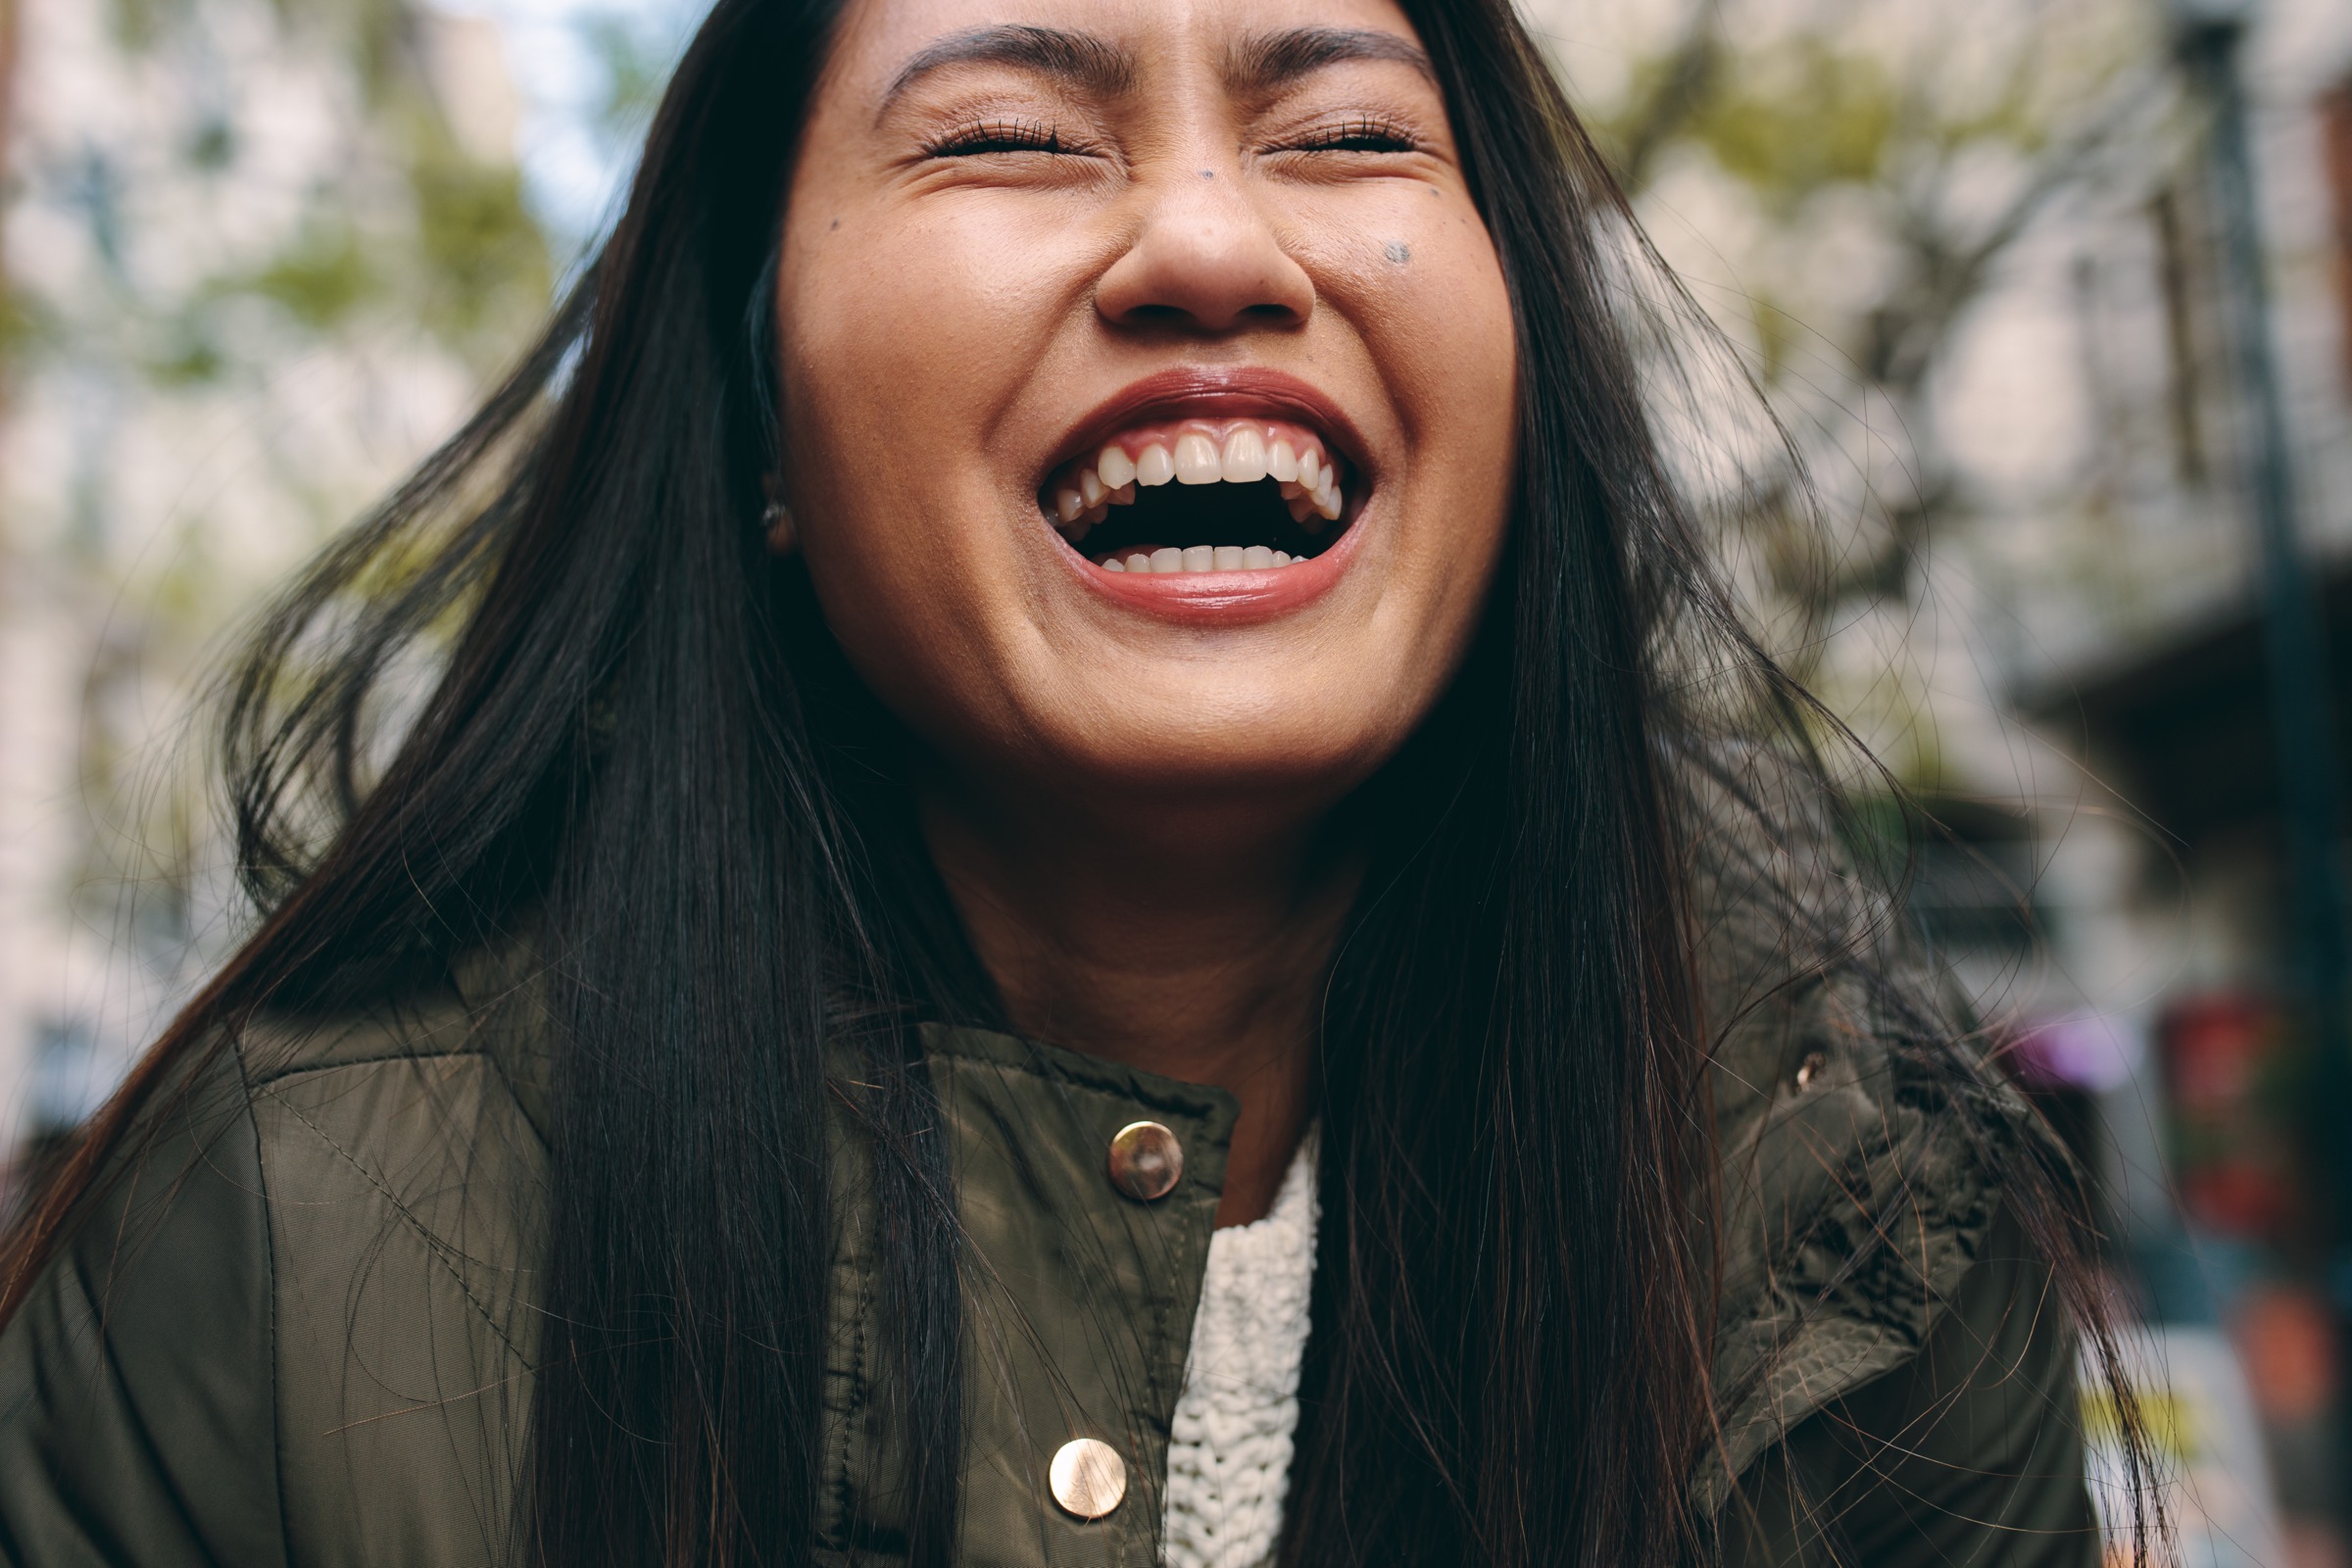 Woman laughing with her mouth open